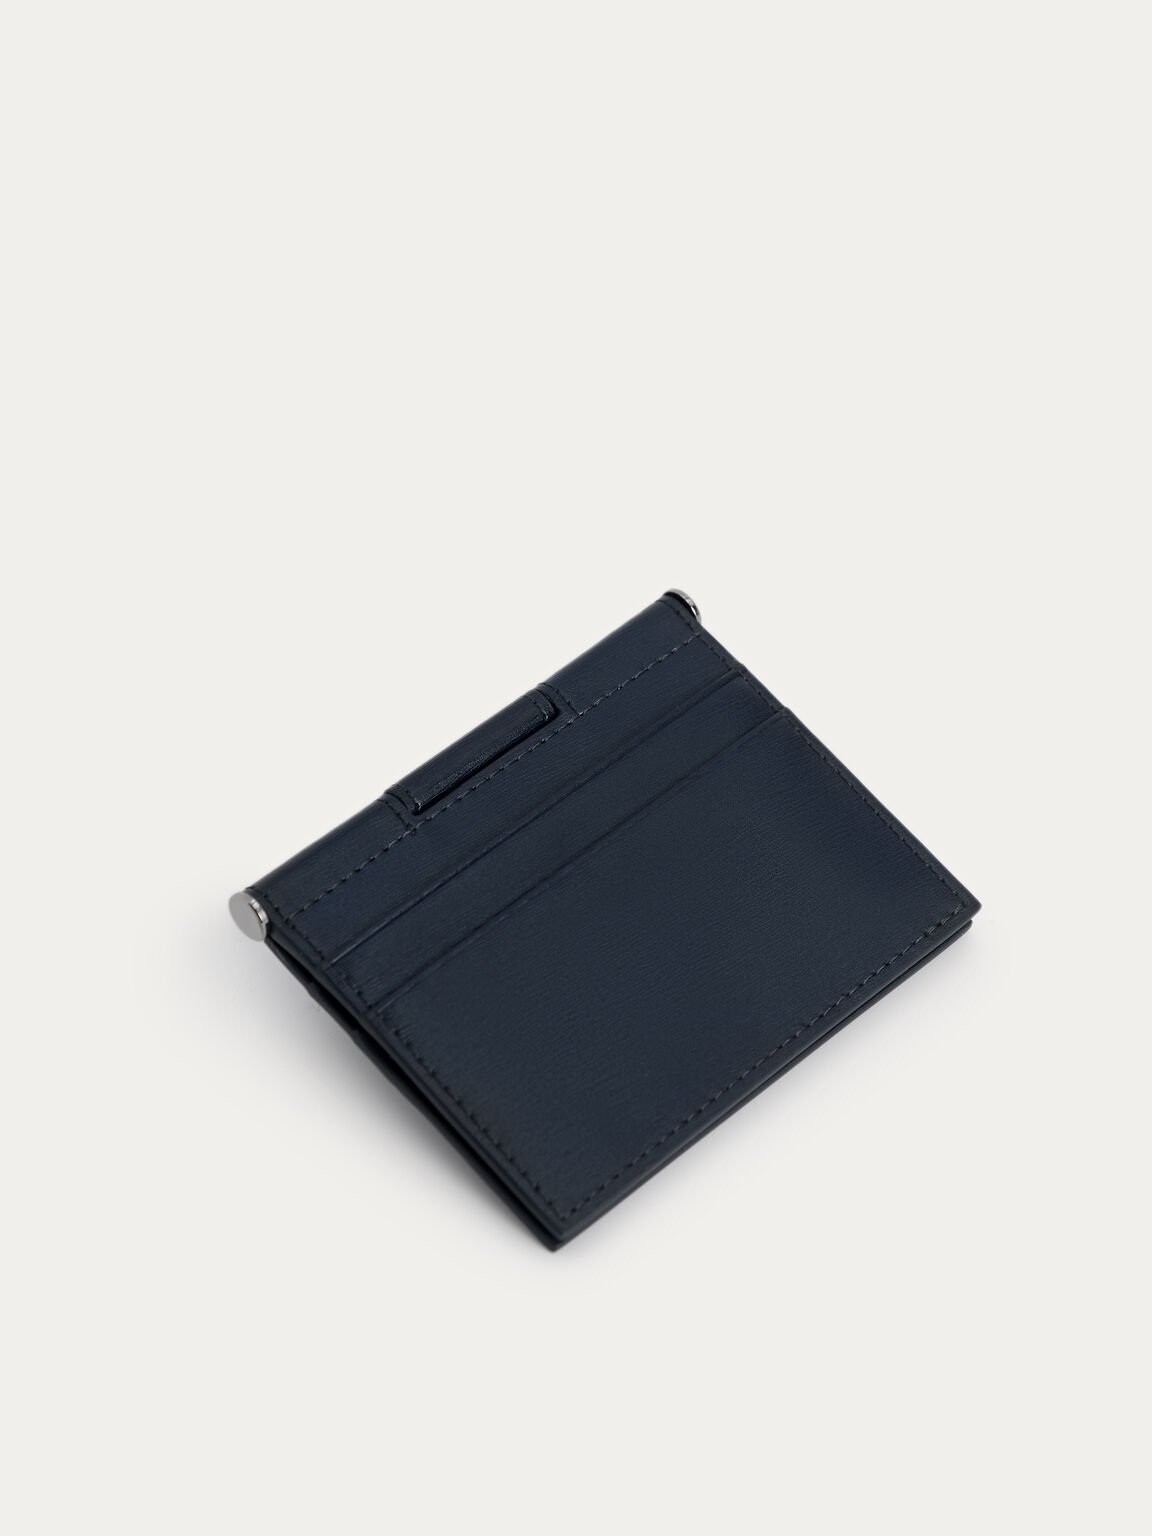 Textured Leather Flat Card Holder, Navy